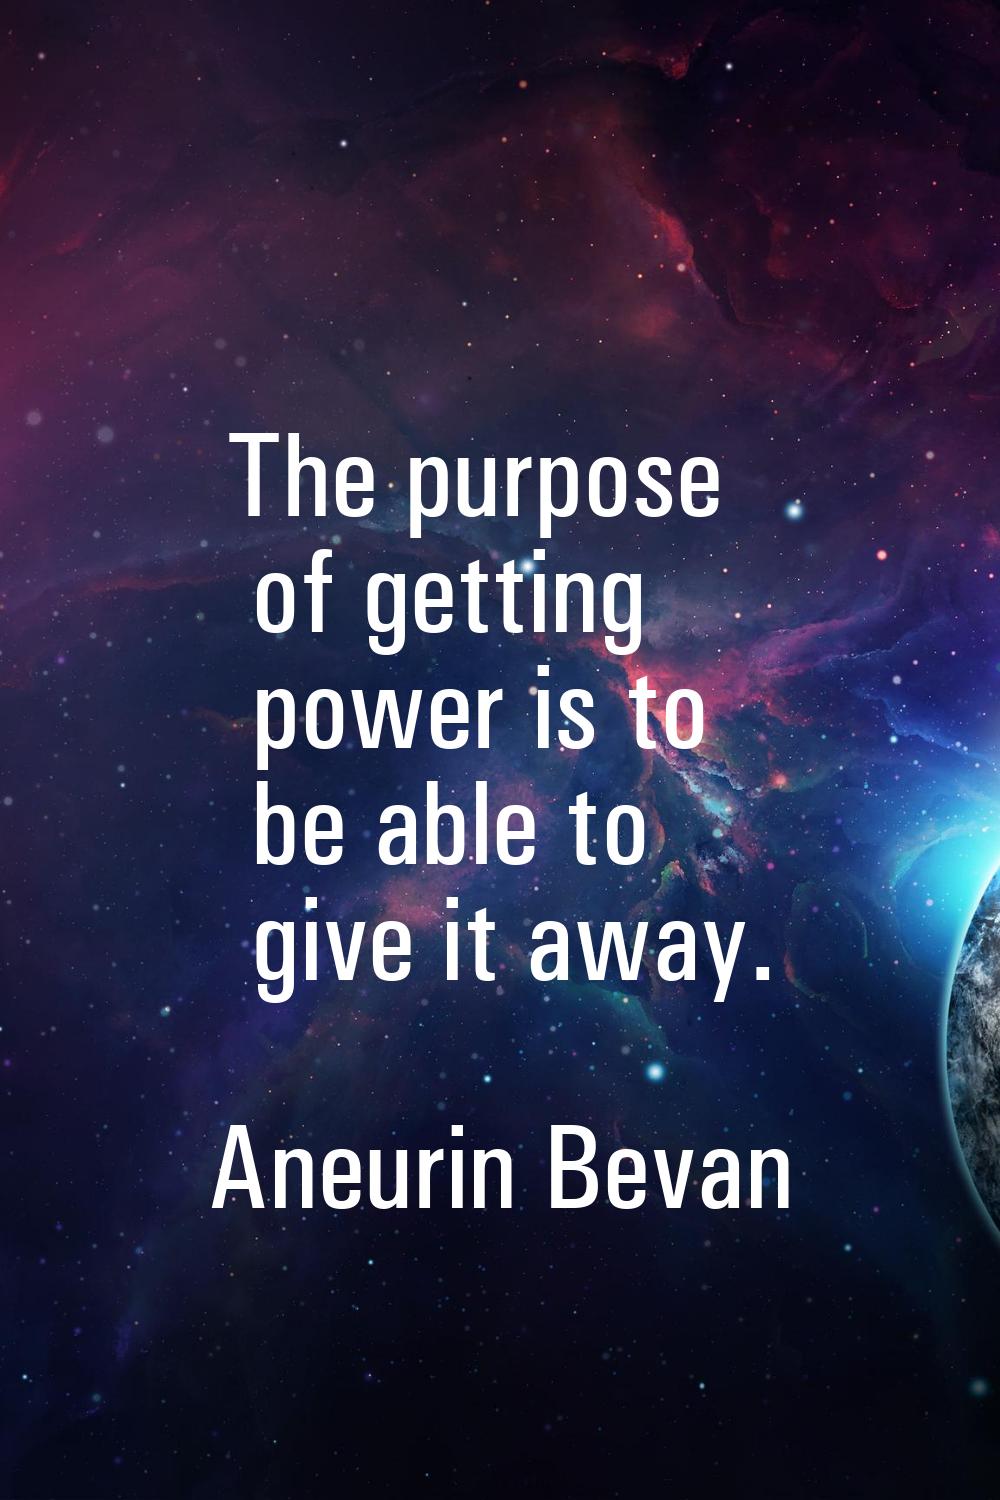 The purpose of getting power is to be able to give it away.